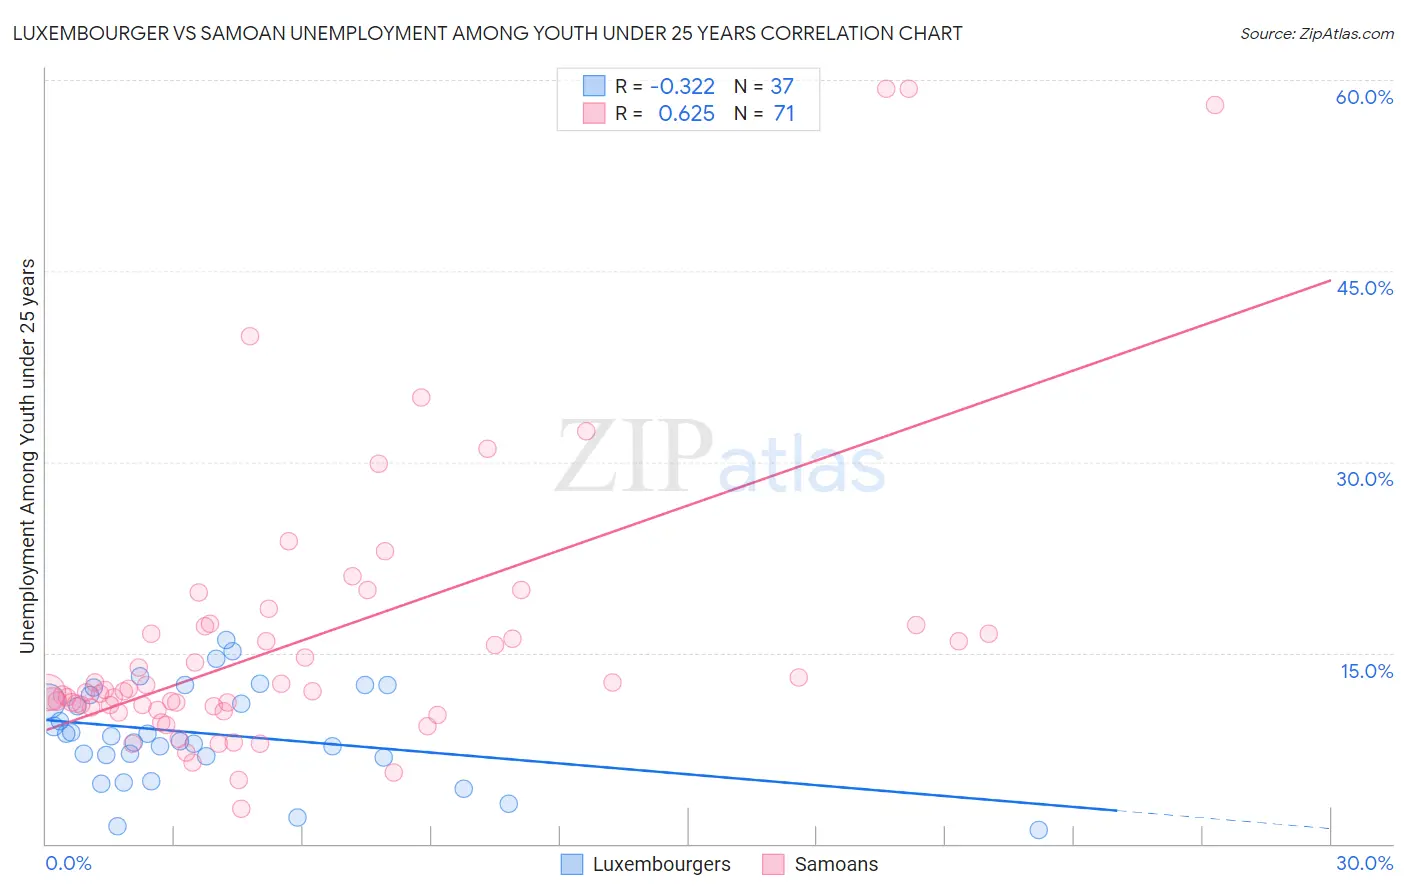 Luxembourger vs Samoan Unemployment Among Youth under 25 years